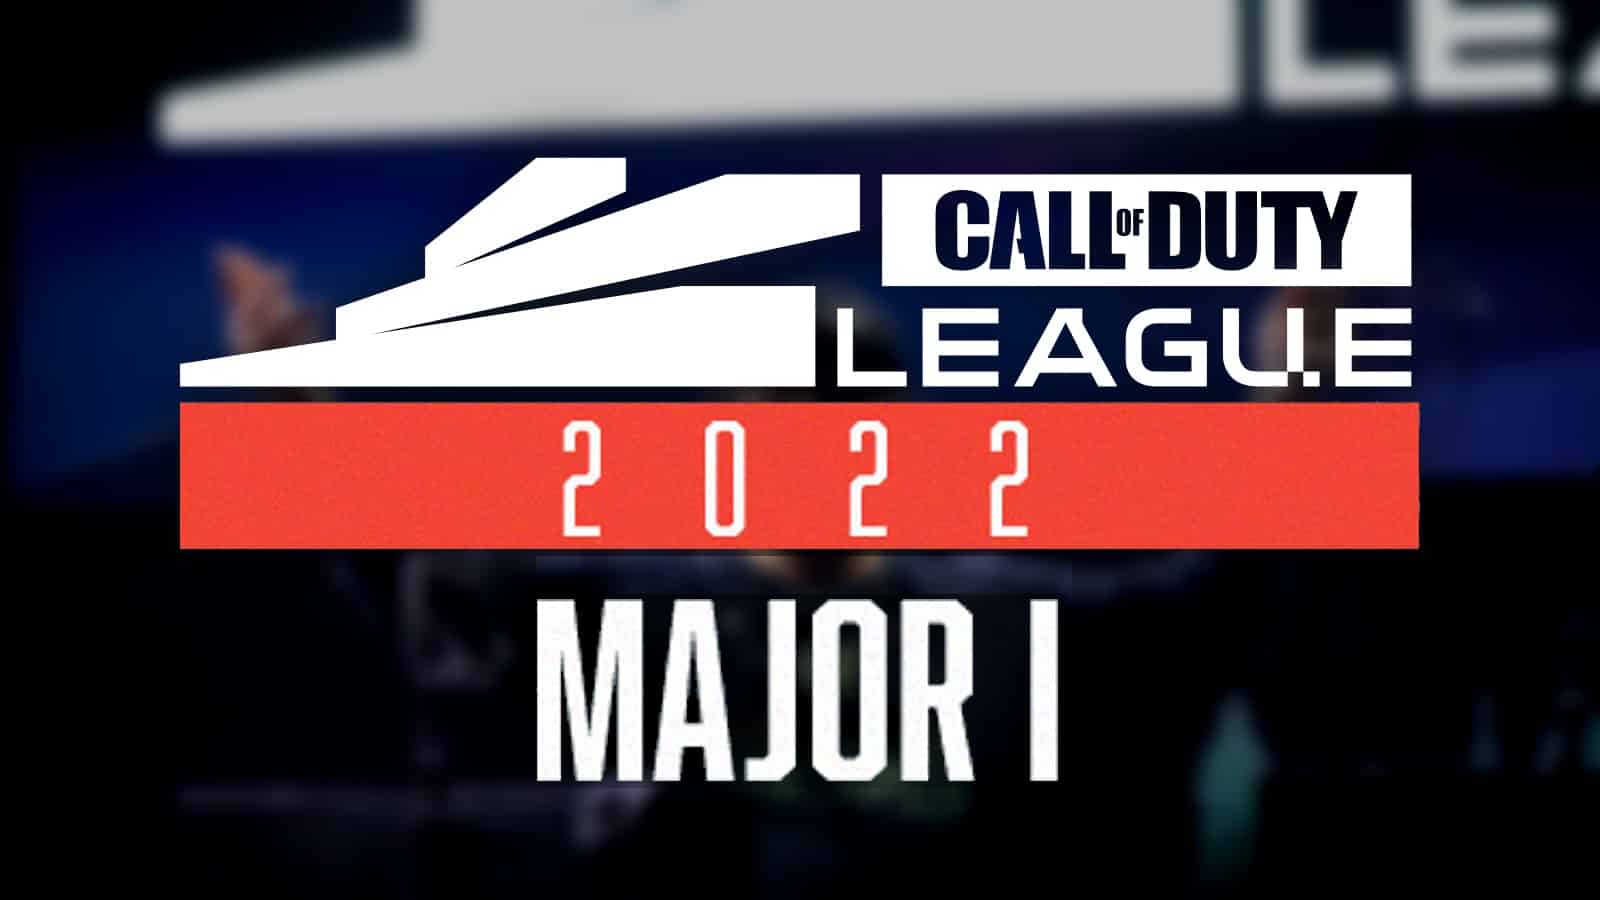 CDL 2022 logo with Major 1 text and blurred CoD League FormaL background